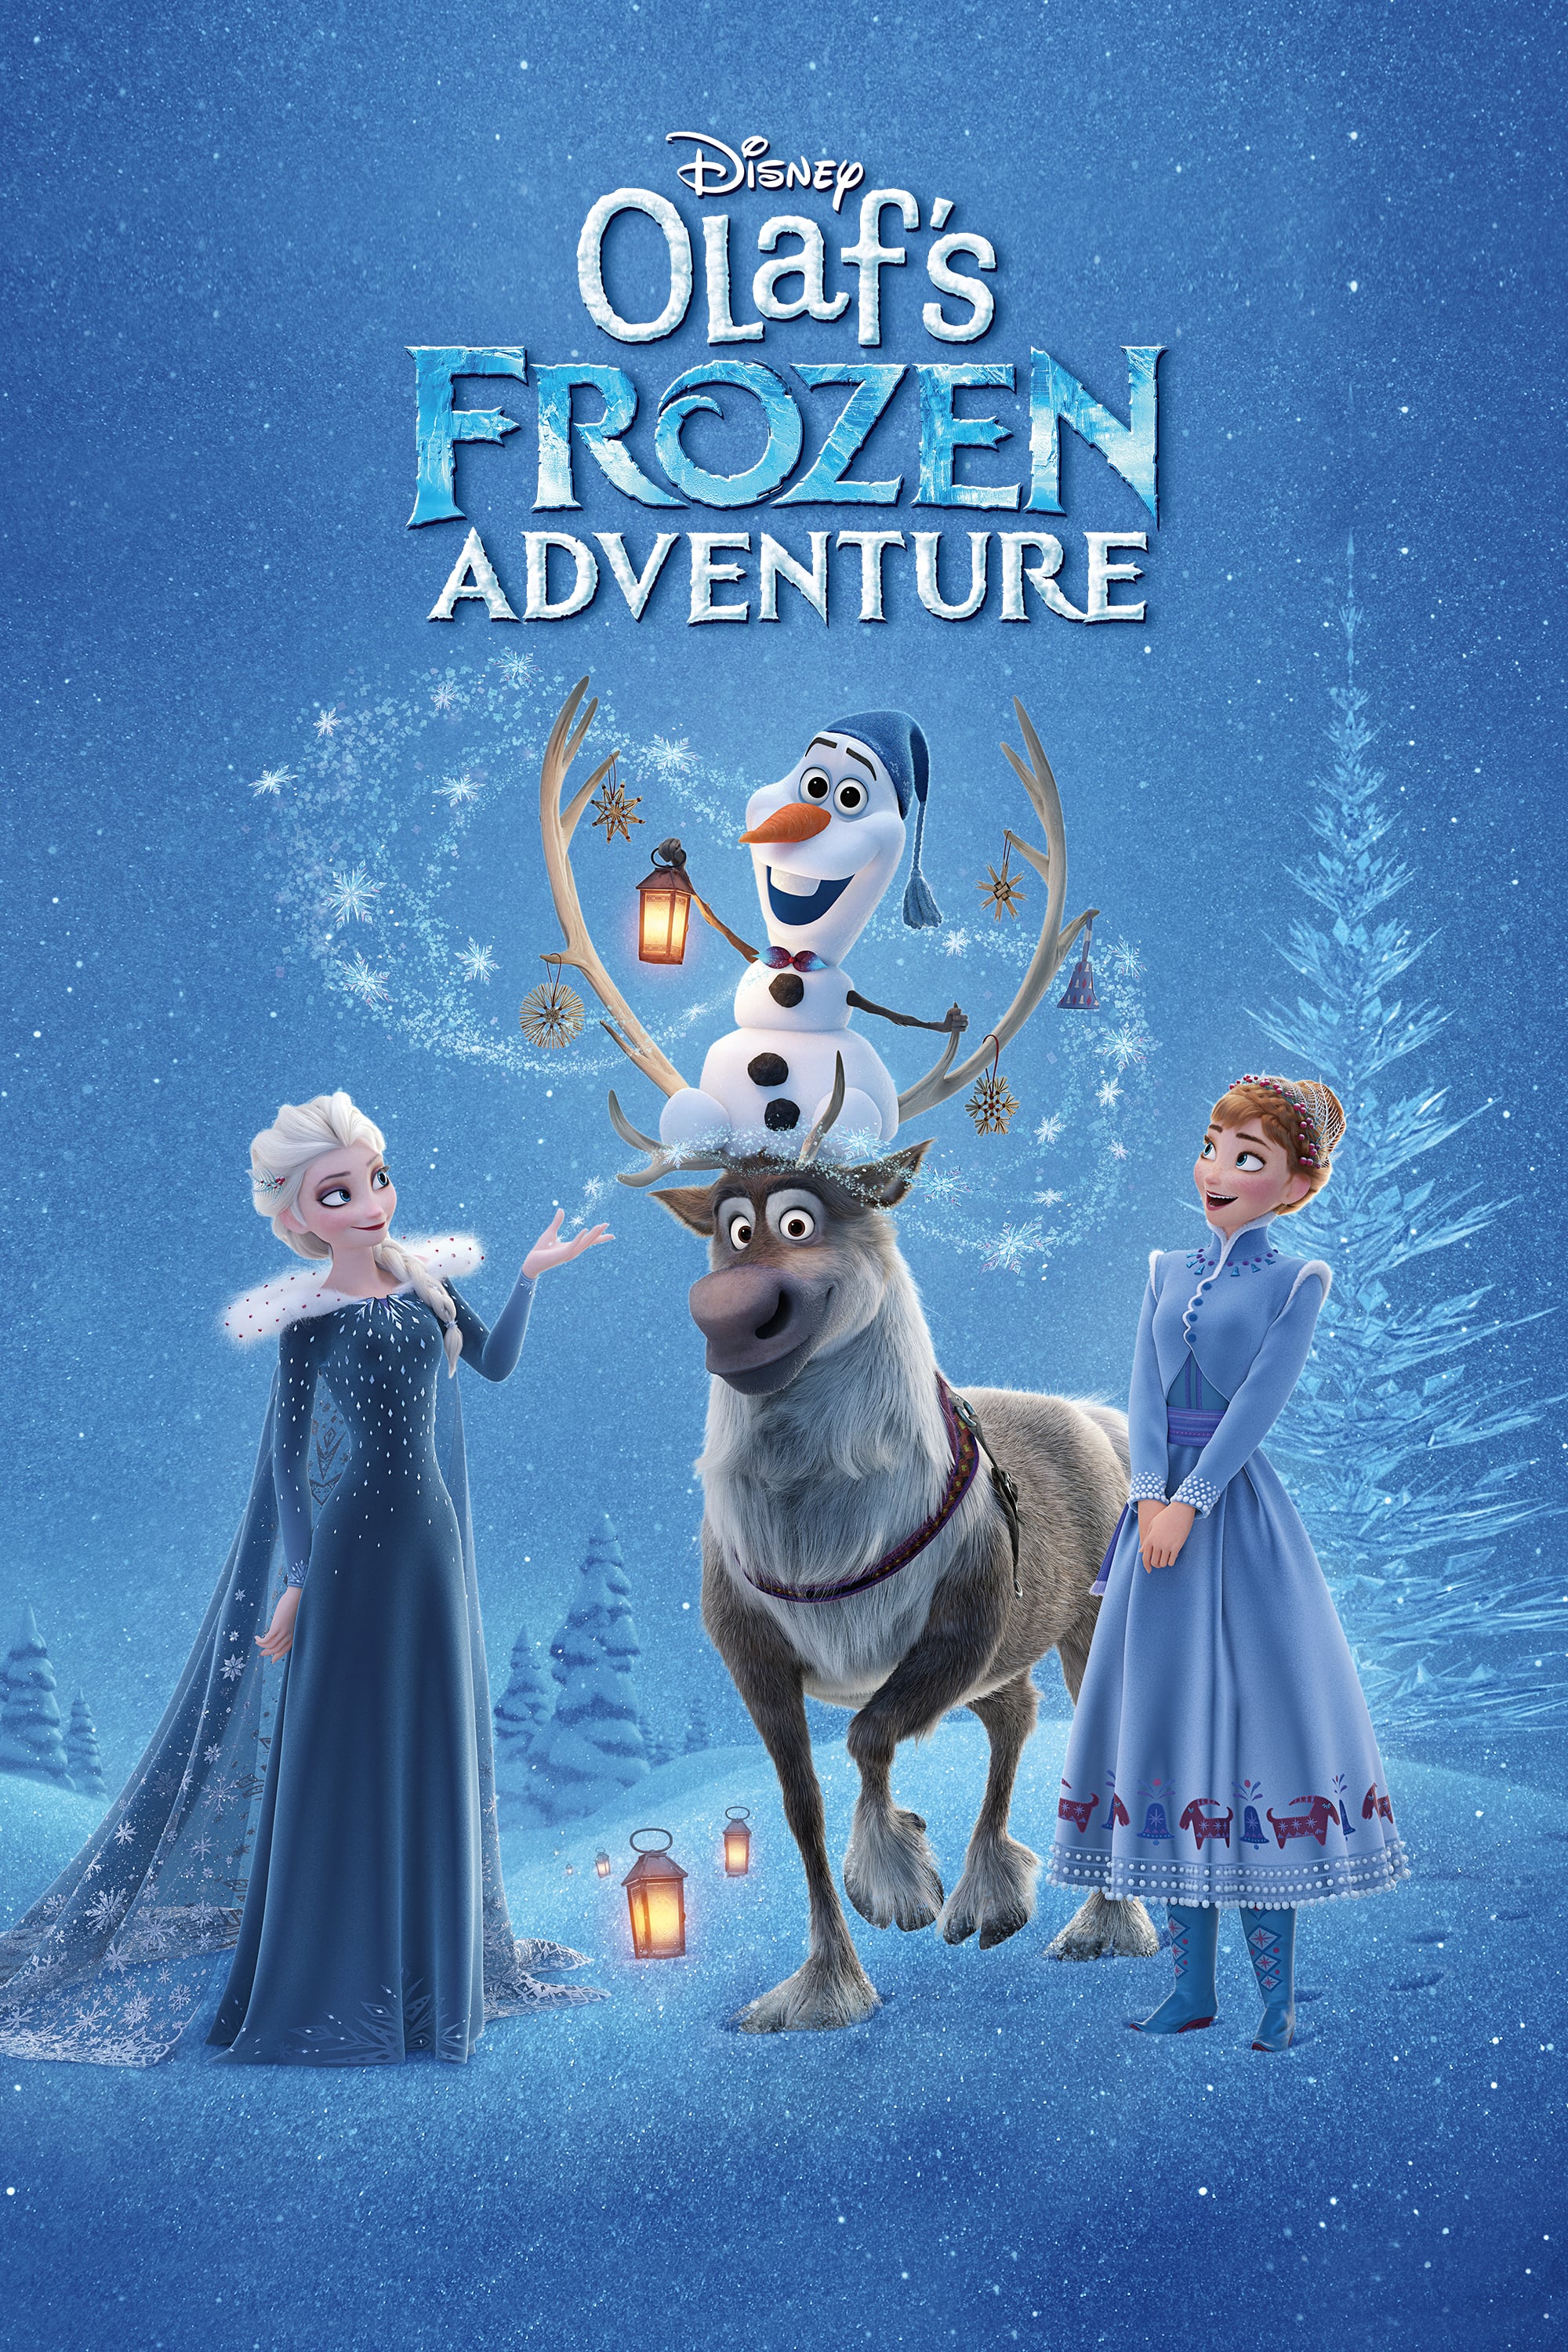 Poster for the movie "Olaf's Frozen Adventure"